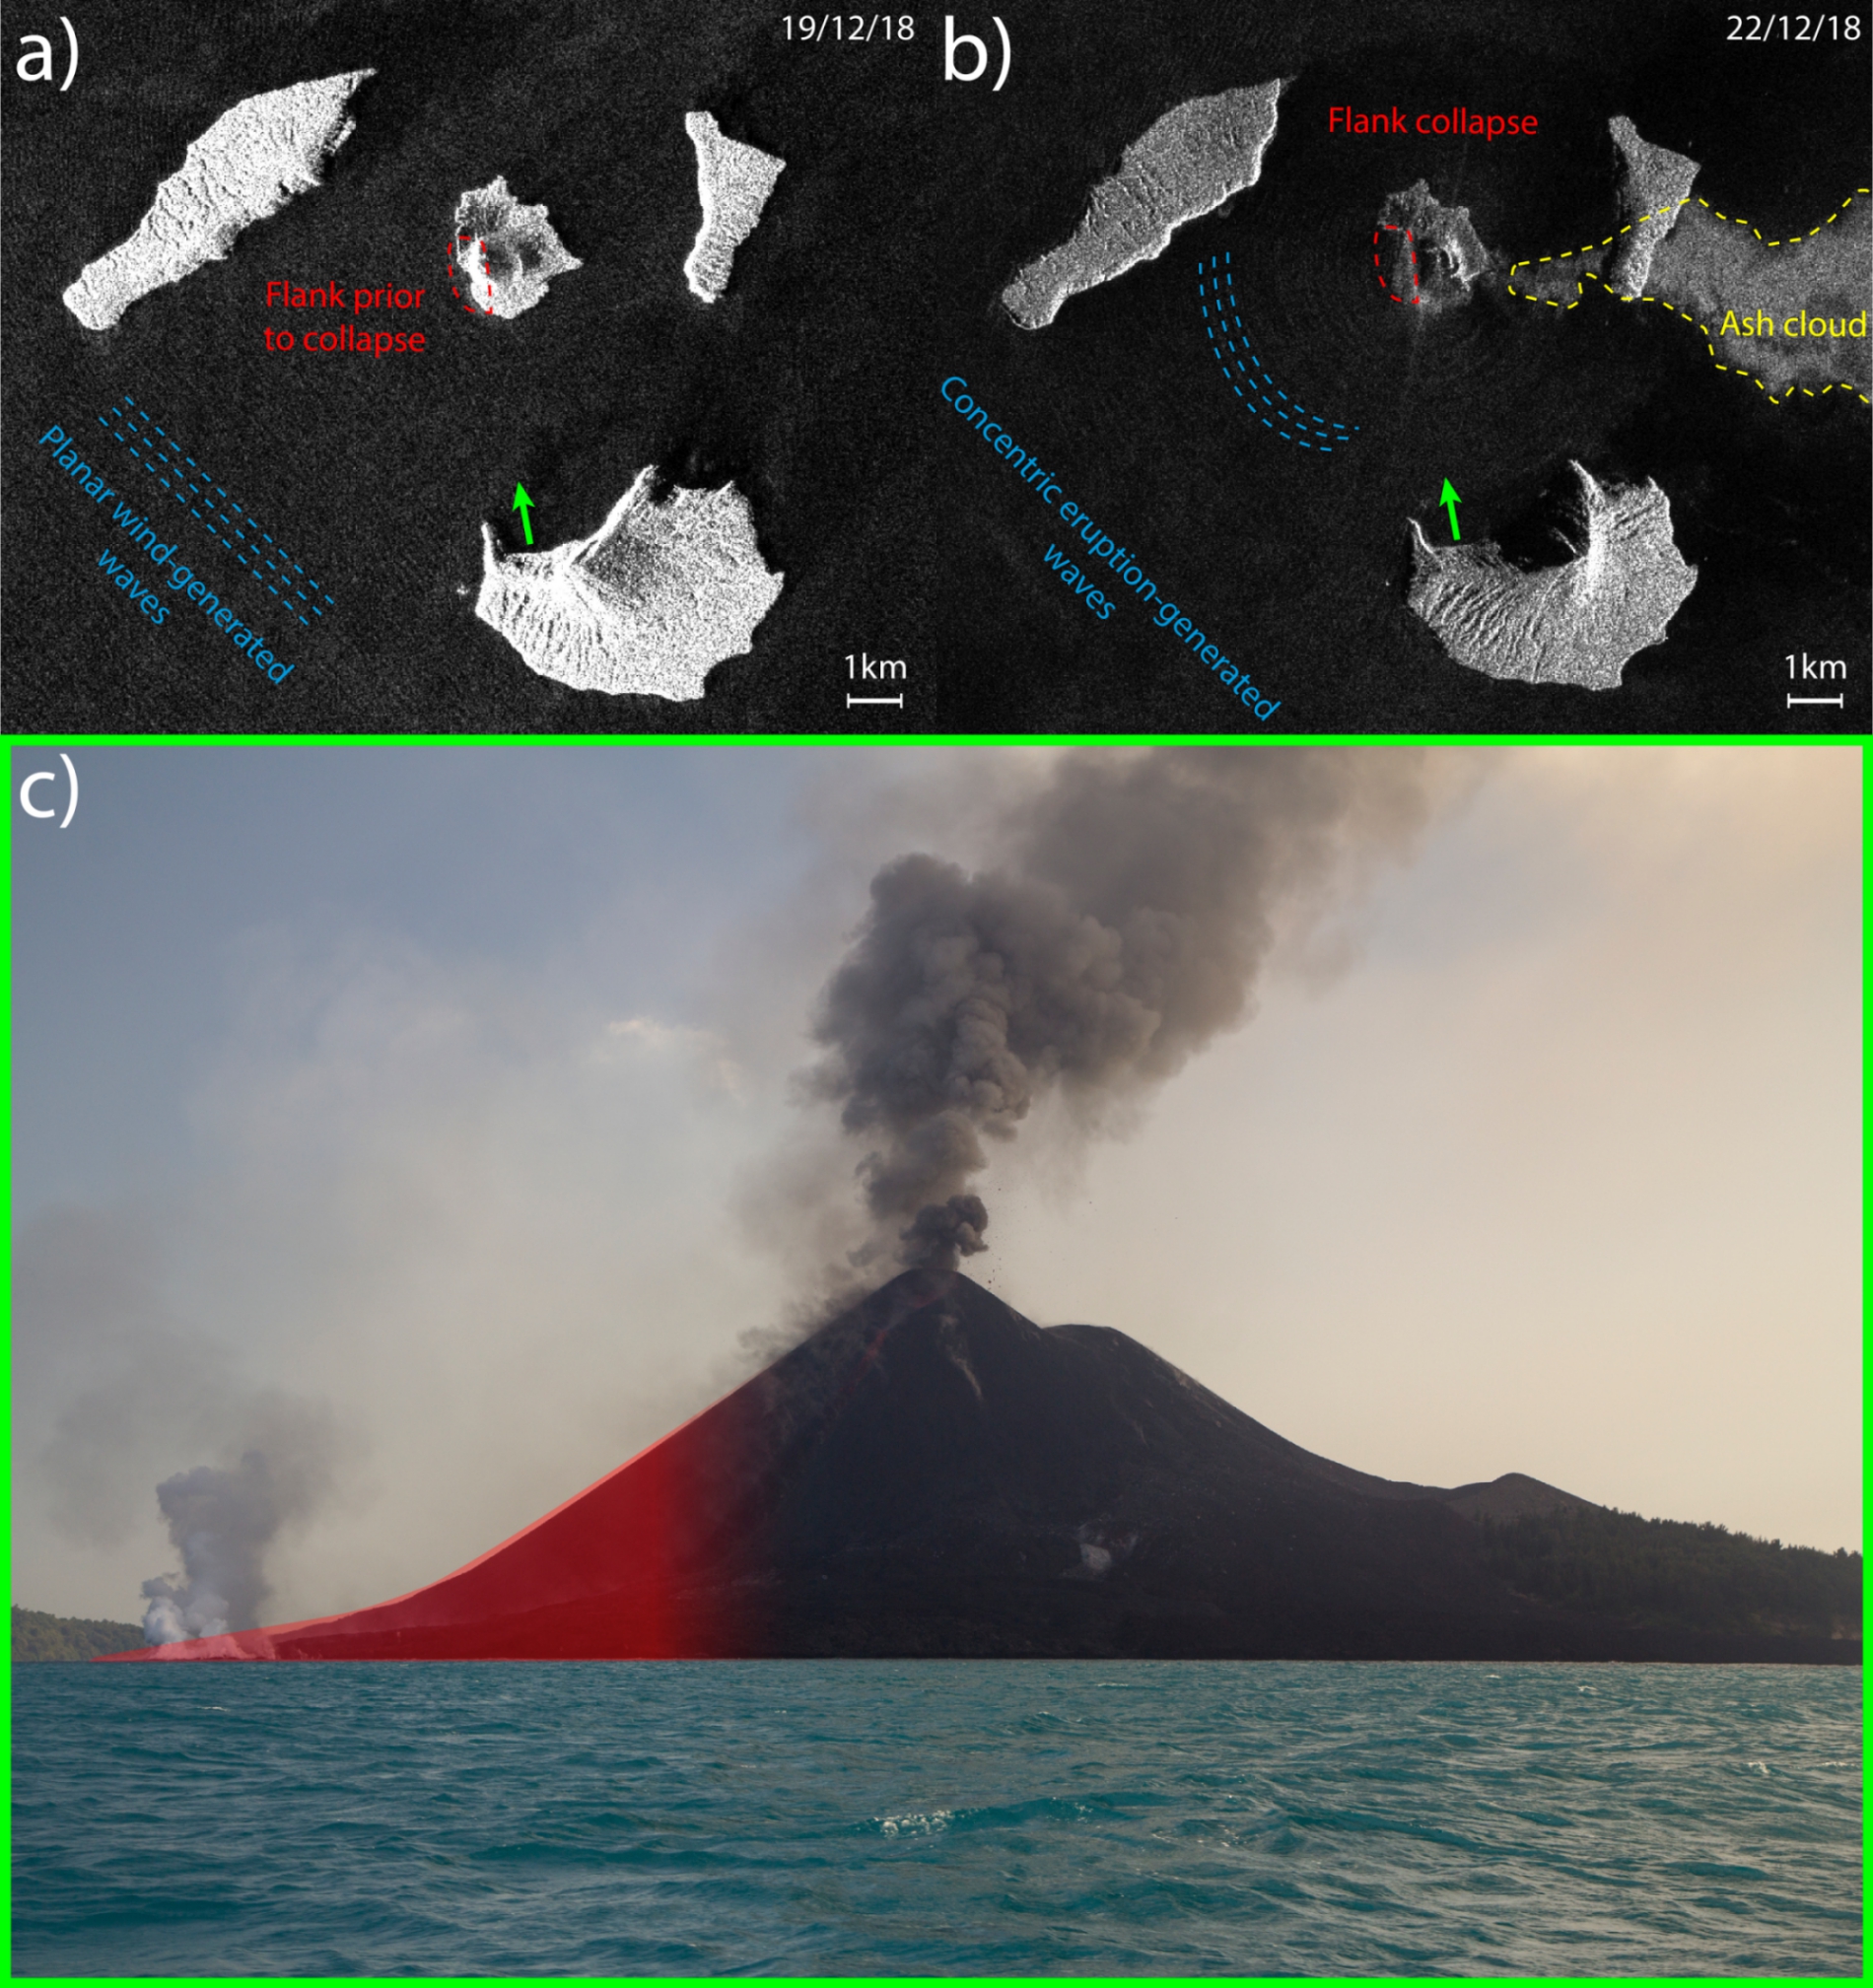 Figure 2: ESA Sentinel-1 images before (a) and after (b) the flank collapse. Approximate flank collapse region outlined in red, waves in blue, ash cloud in yellow, and photograph view (c) indicated with green arrow. c) Field photograph of Anak Krakatau from August 2018 with estimated flank collapse region shaded red. (Source: Satellite SAR image from ESA Copernicus Hub, annotations from Dr James D. P. Moore/Earth Observatory of Singapore. Photo by Dr James D. P. Moore/Earth Observatory of Singapore)